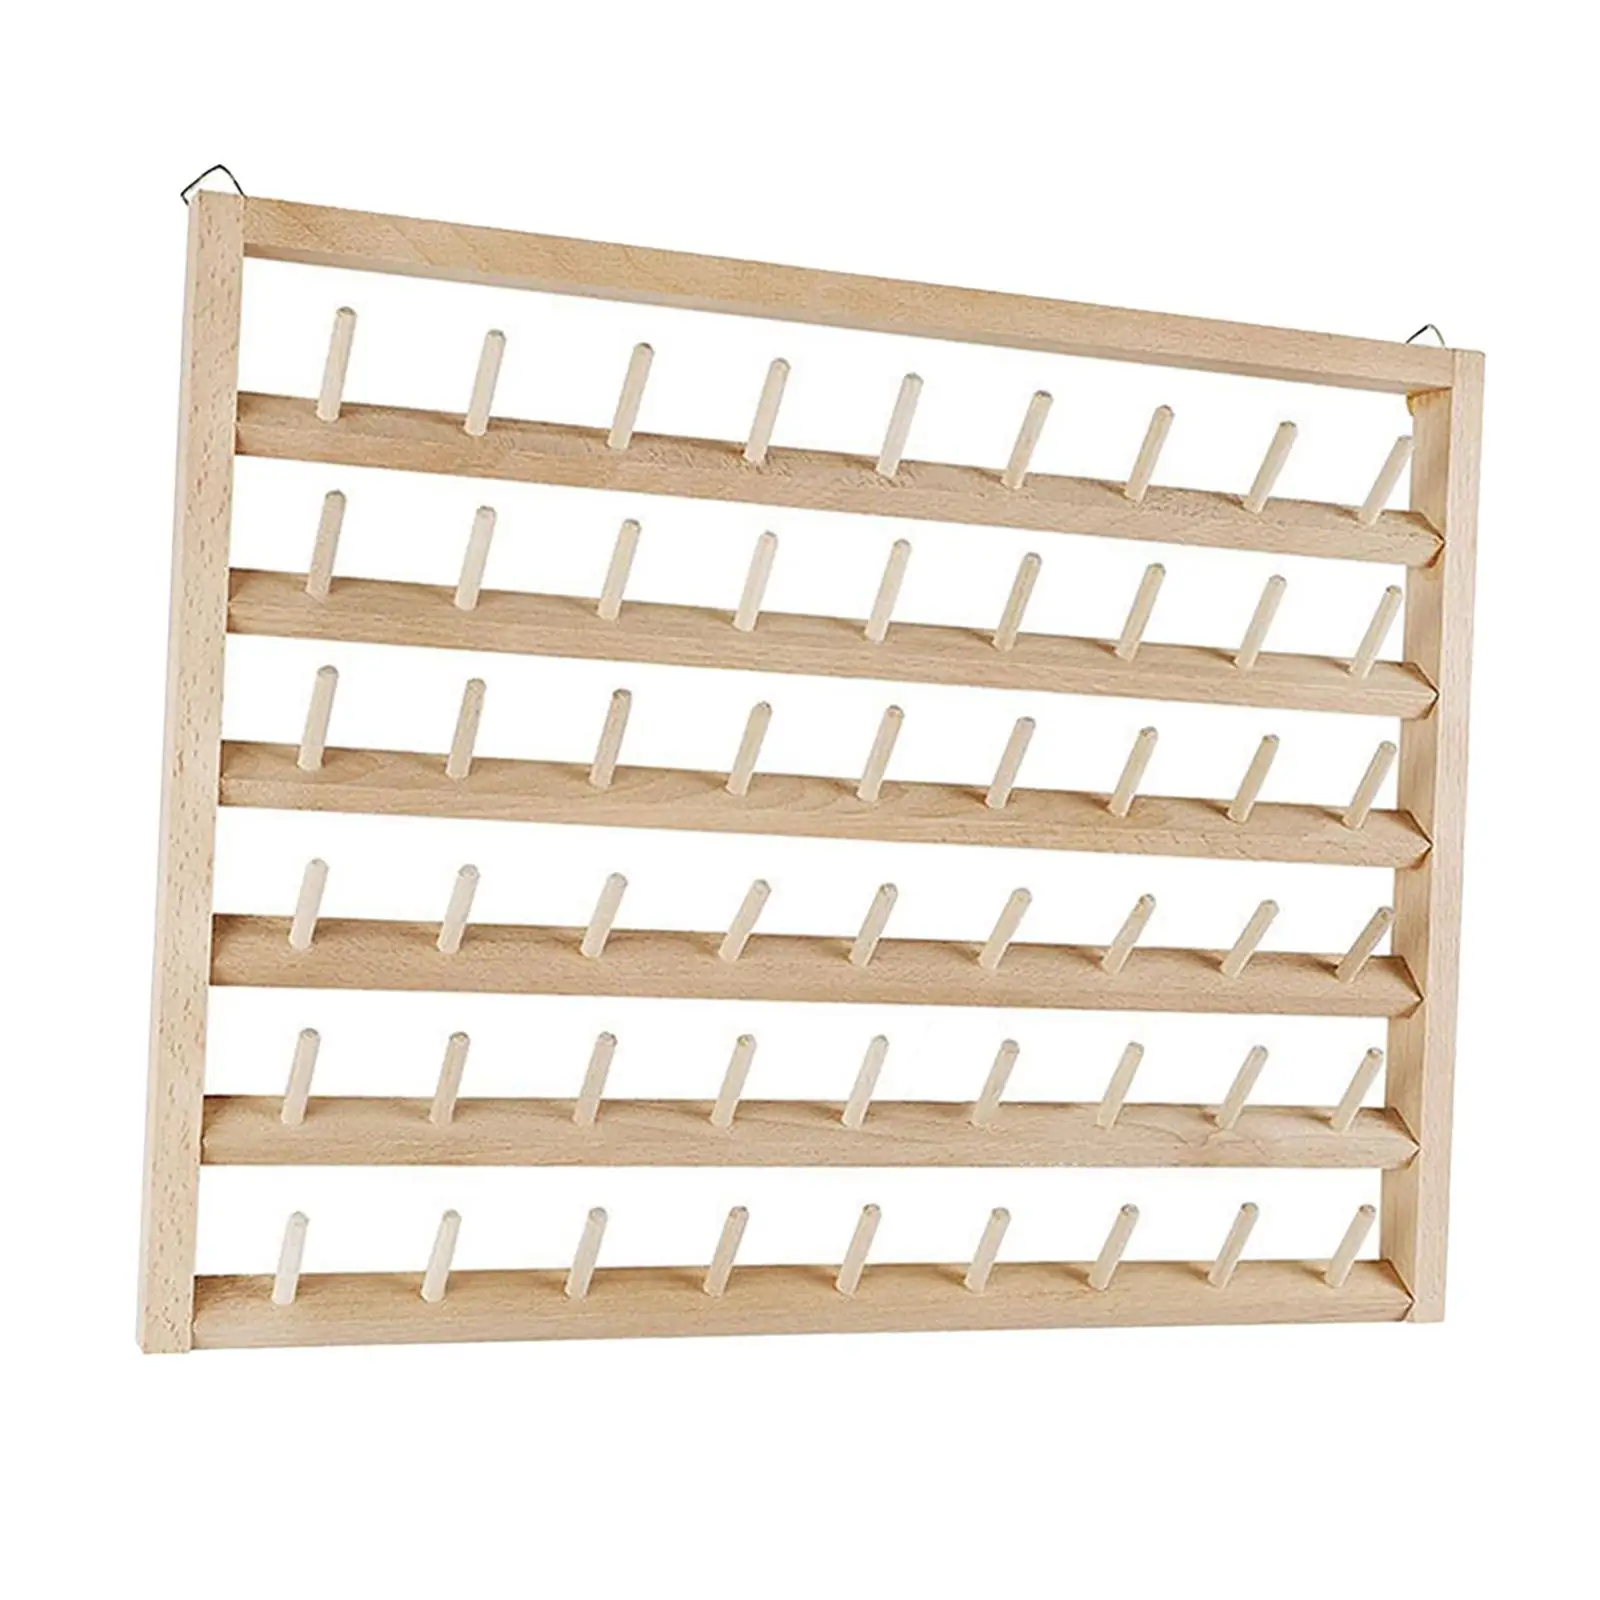 54-Spool Thread Rack, Wooden Thread Holder Sewing Organizer for Sewing, Quilting, Embroidery, Hair-braiding